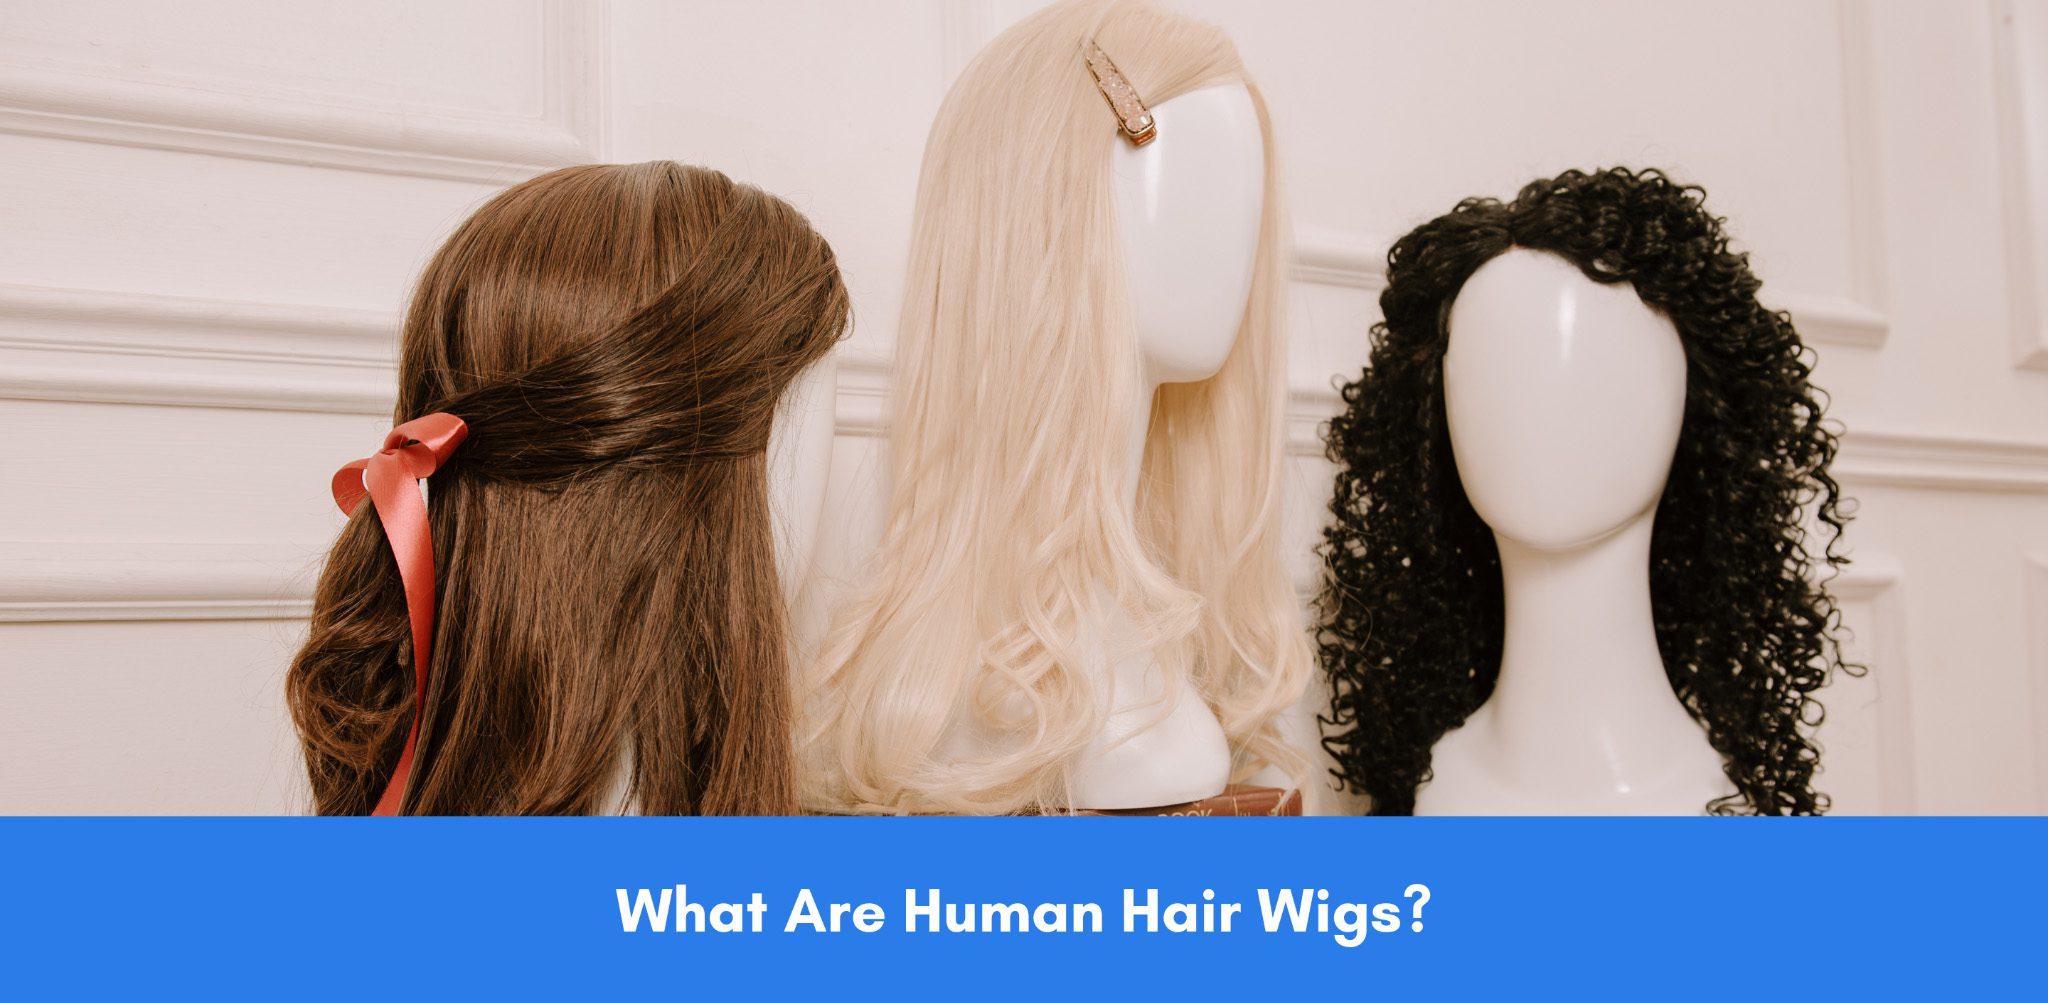 What Are Human Hair Wigs?